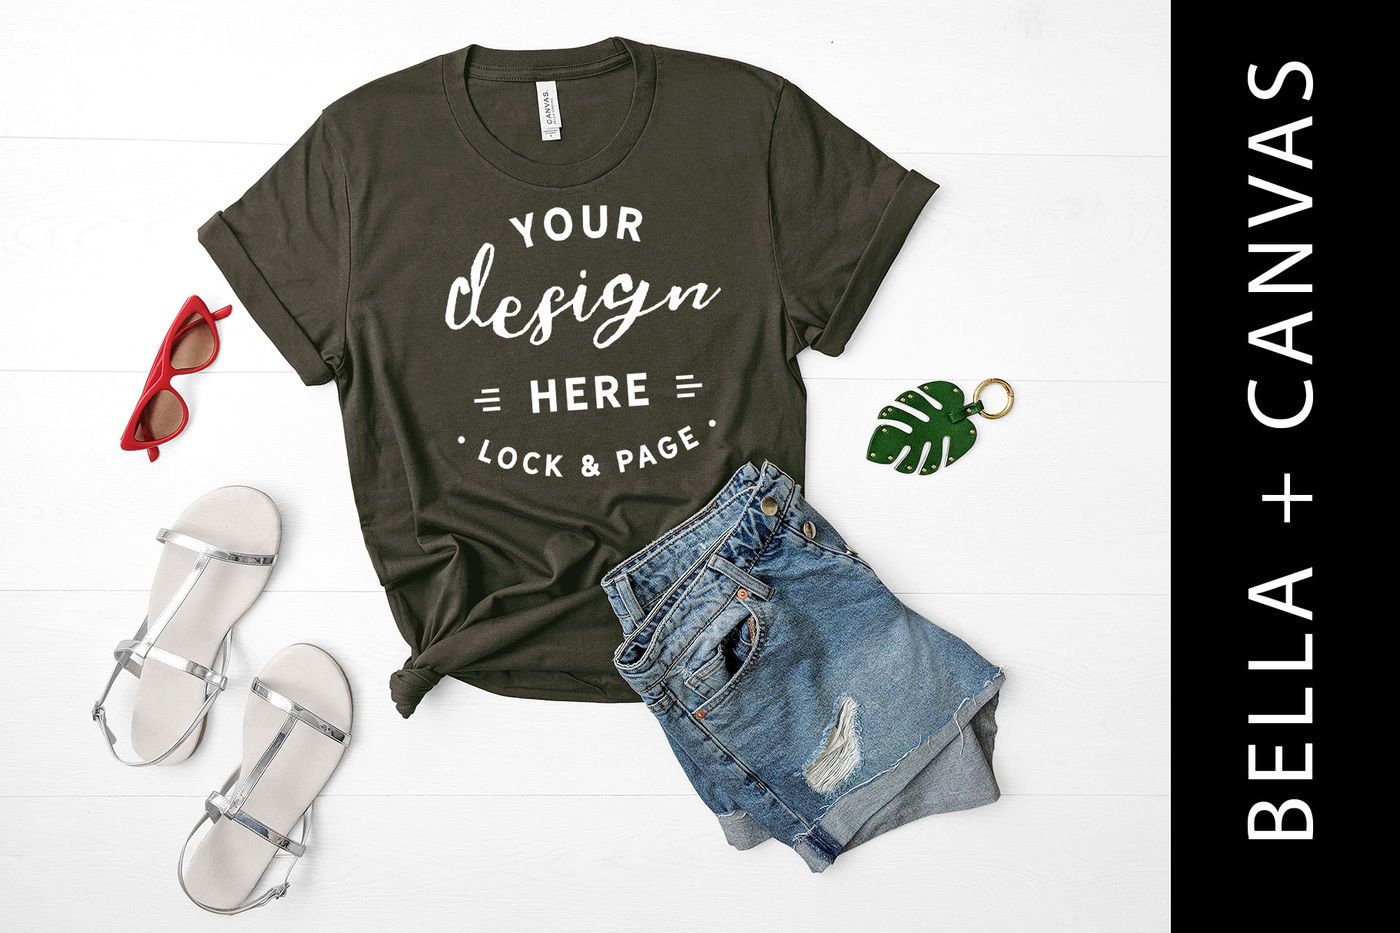 Download Women White T Shirt Mockup Blank Tshirt Display Summer Sandals Shorts Flatlay Image Download Bella Canvas Styled Shirt Photography Art Collectibles Color Delage Com Br